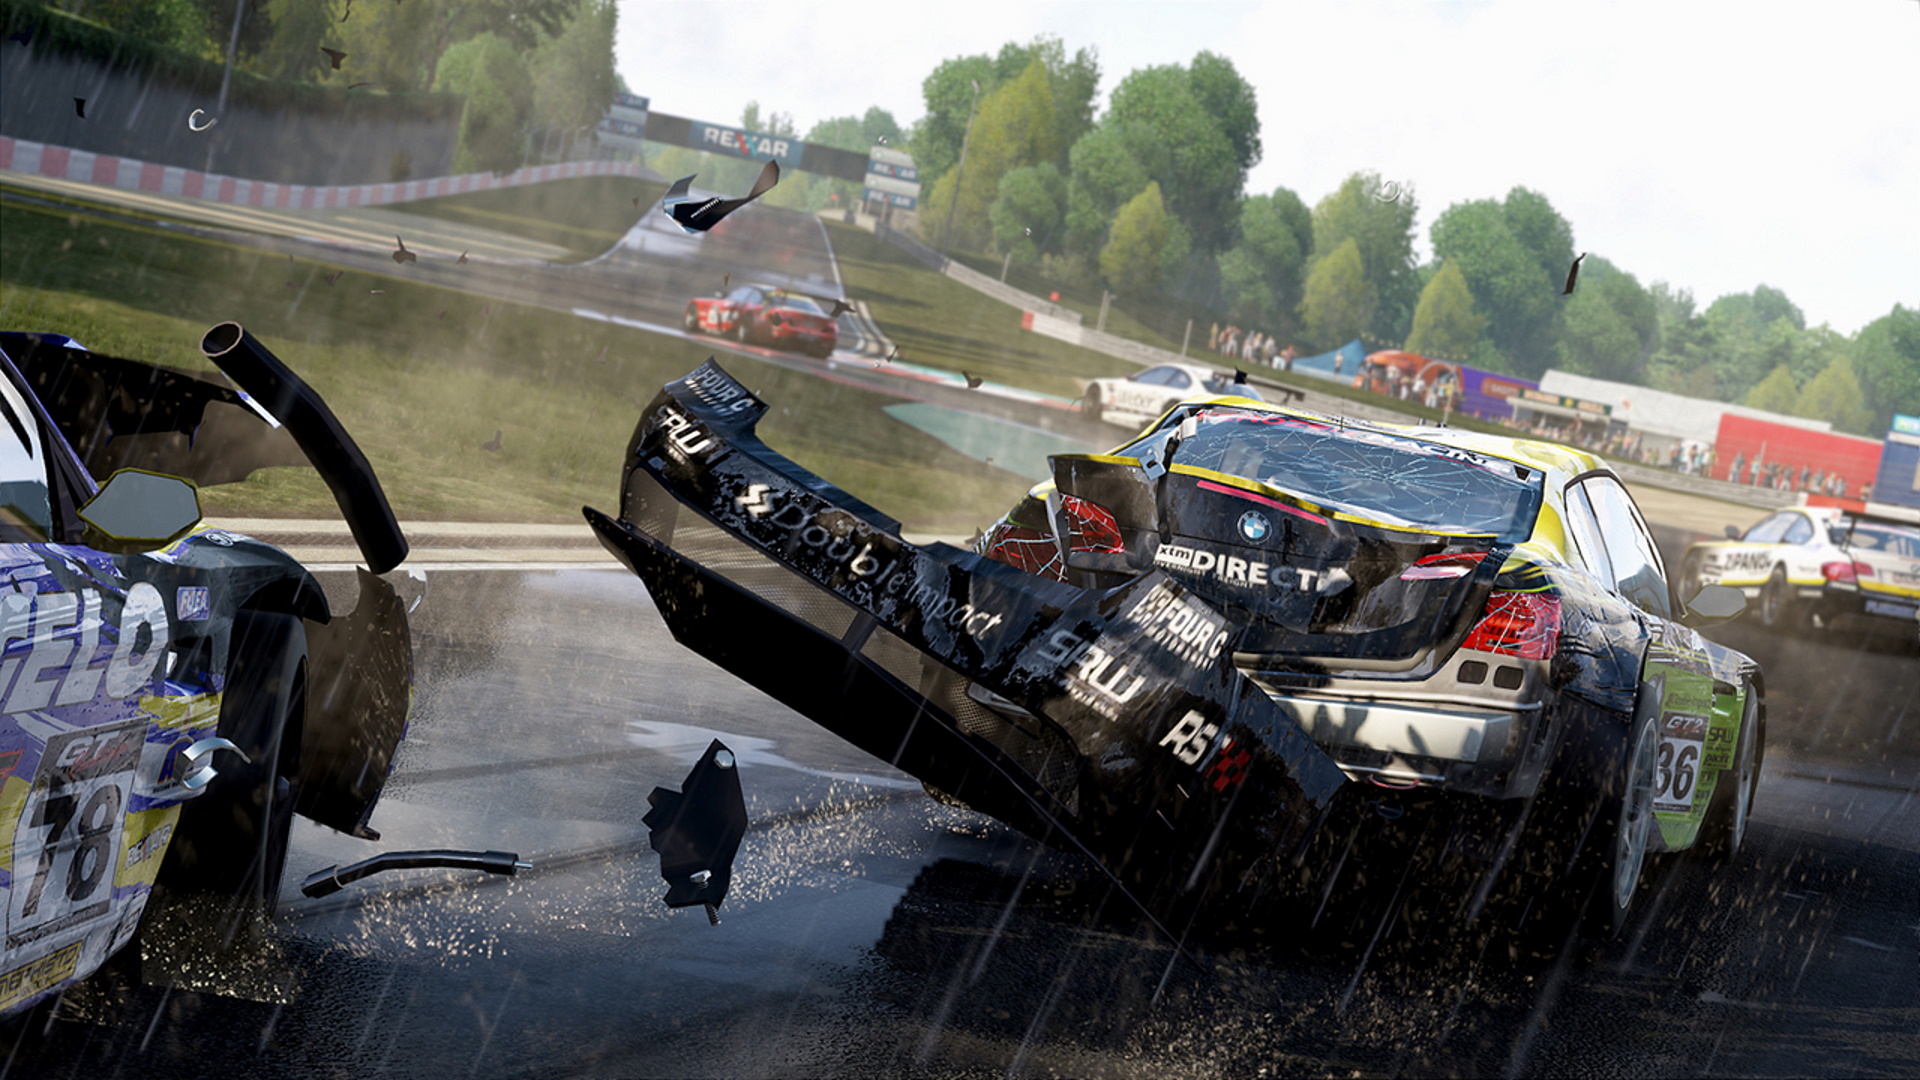 Project Cars delisted following licensing issues